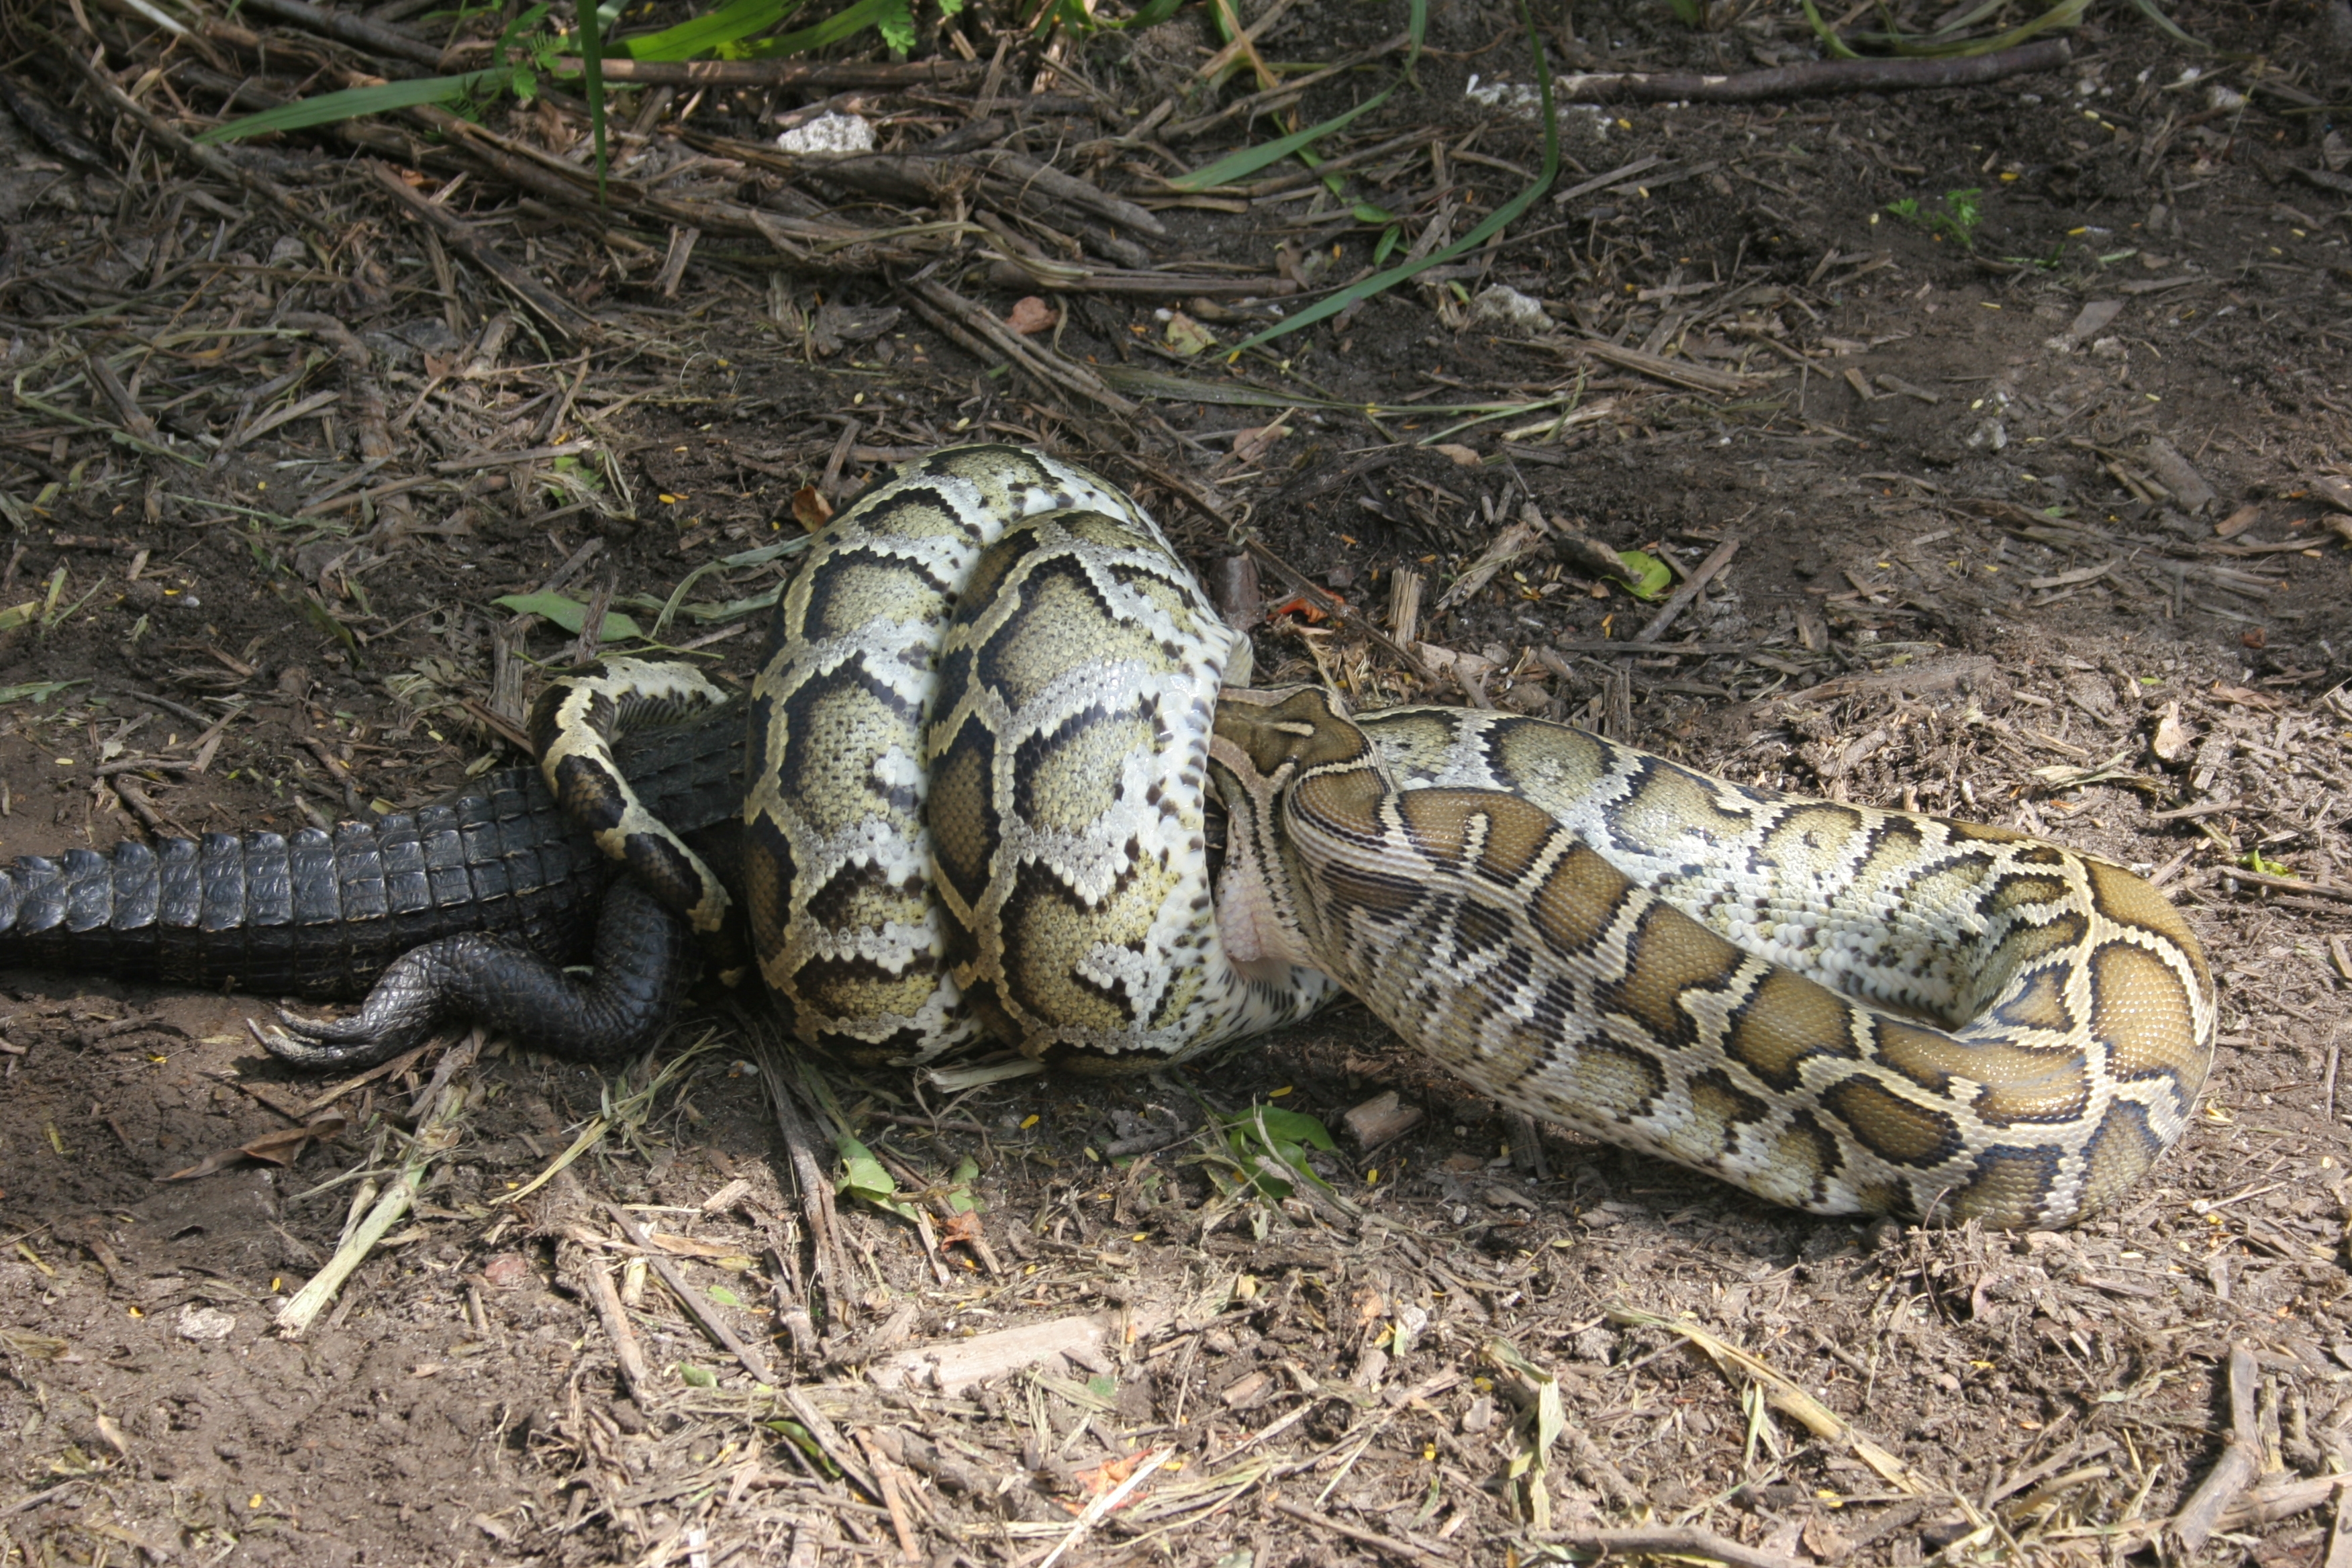 How Are Burmese Pythons Damaging the Everglades Ecosystem?